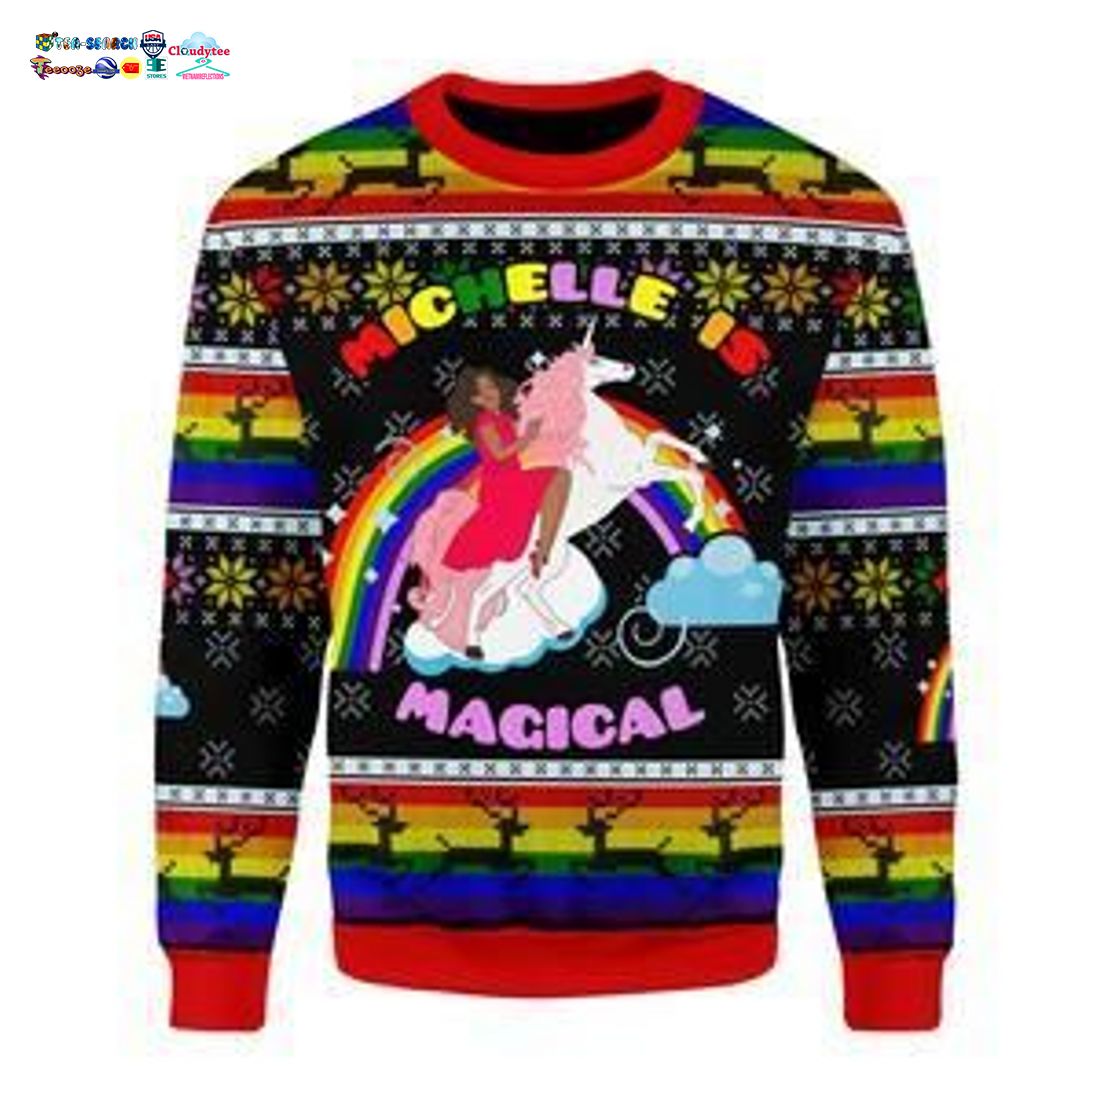 Michelle is Magical Ugly Christmas Sweater - Cutting dash